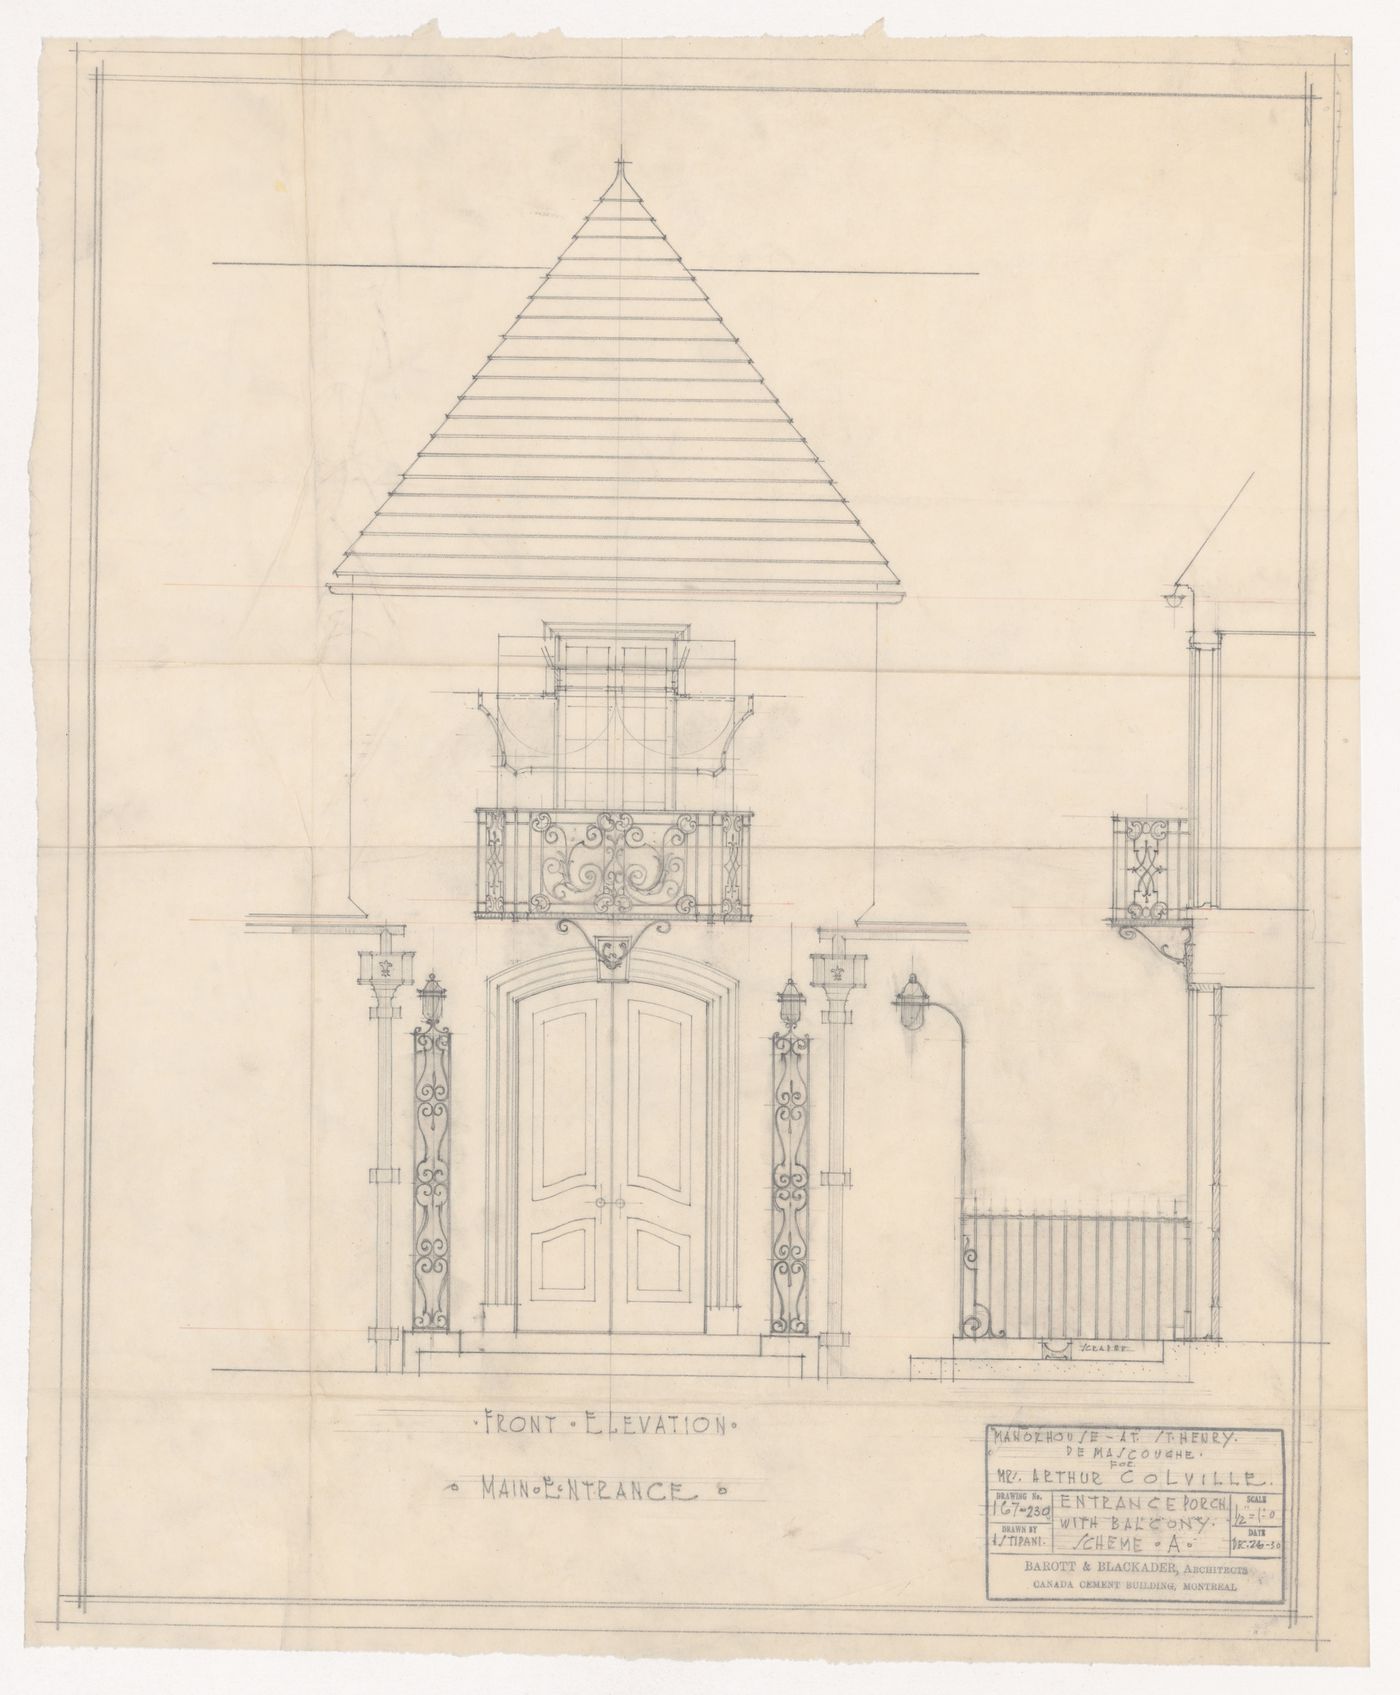 Elevation of entrance porch for Colville Manor, Mascouche, Québec